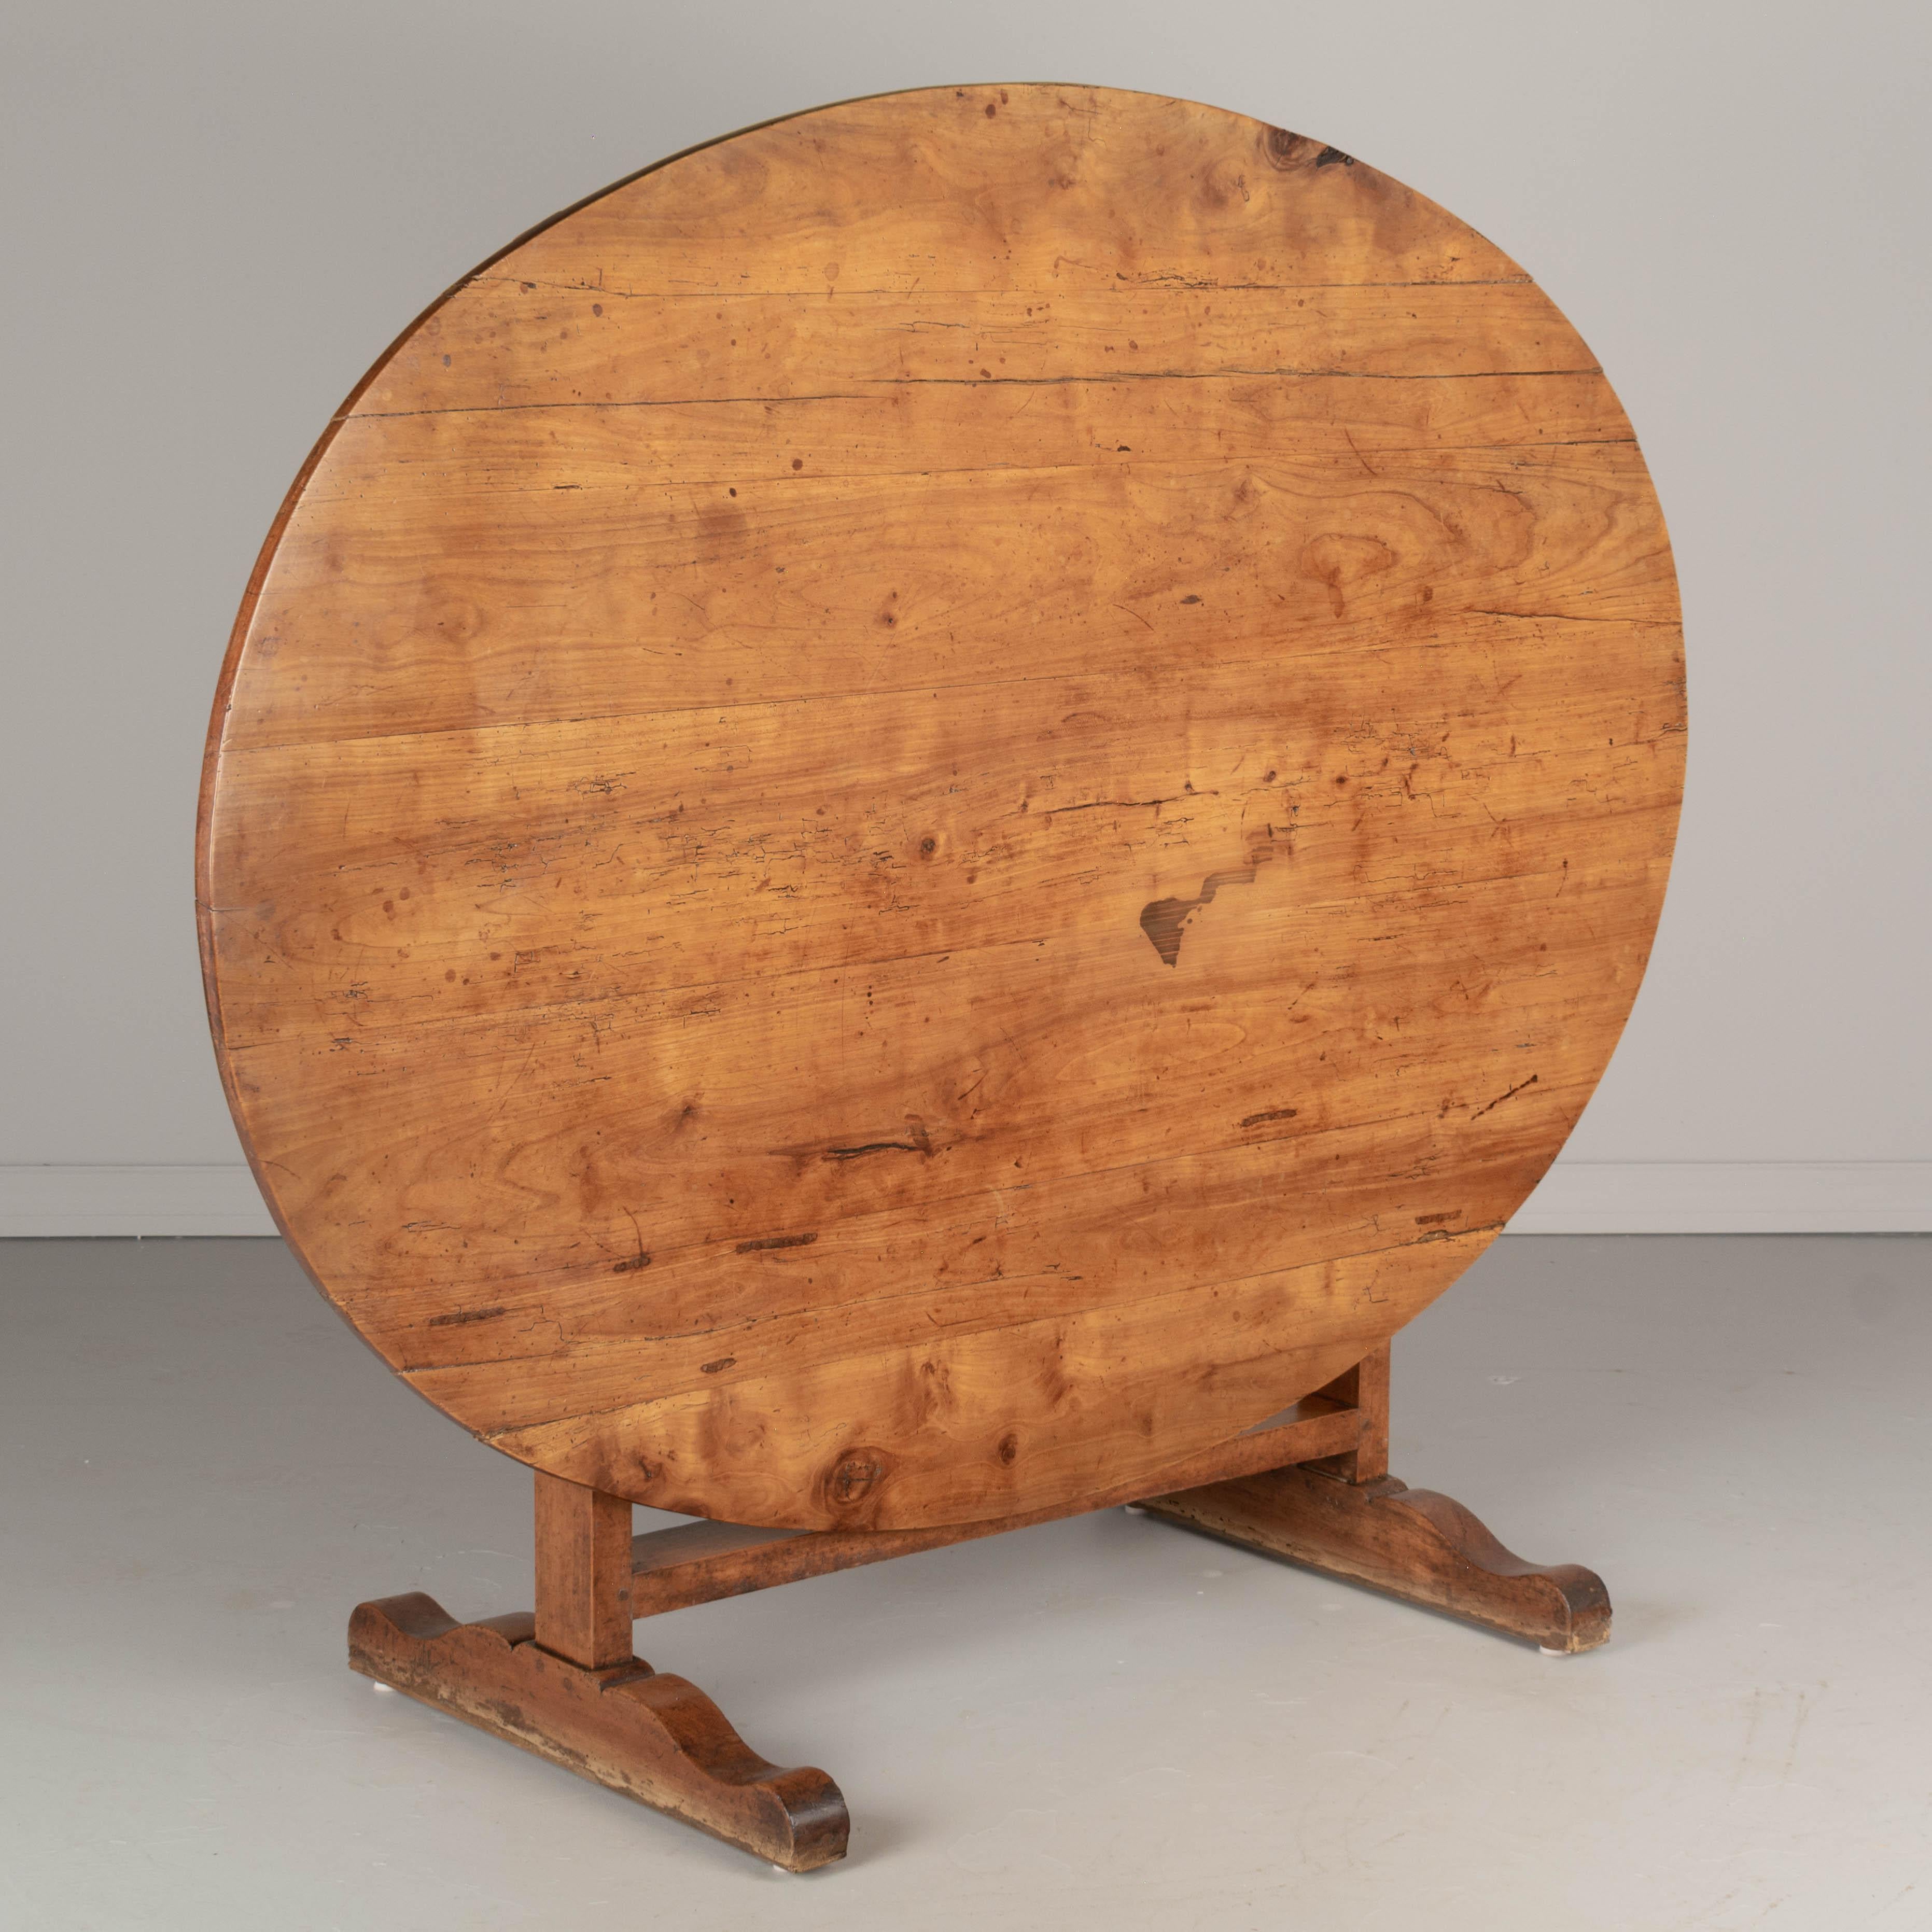 A French Country oval wine tasting table, or tilt-top table, from the Loire Valley. Made of solid cherry wood with thick and sturdy base. Beautiful character to the wood with interesting grain and knots. Well-crafted with mortise and tenon joints